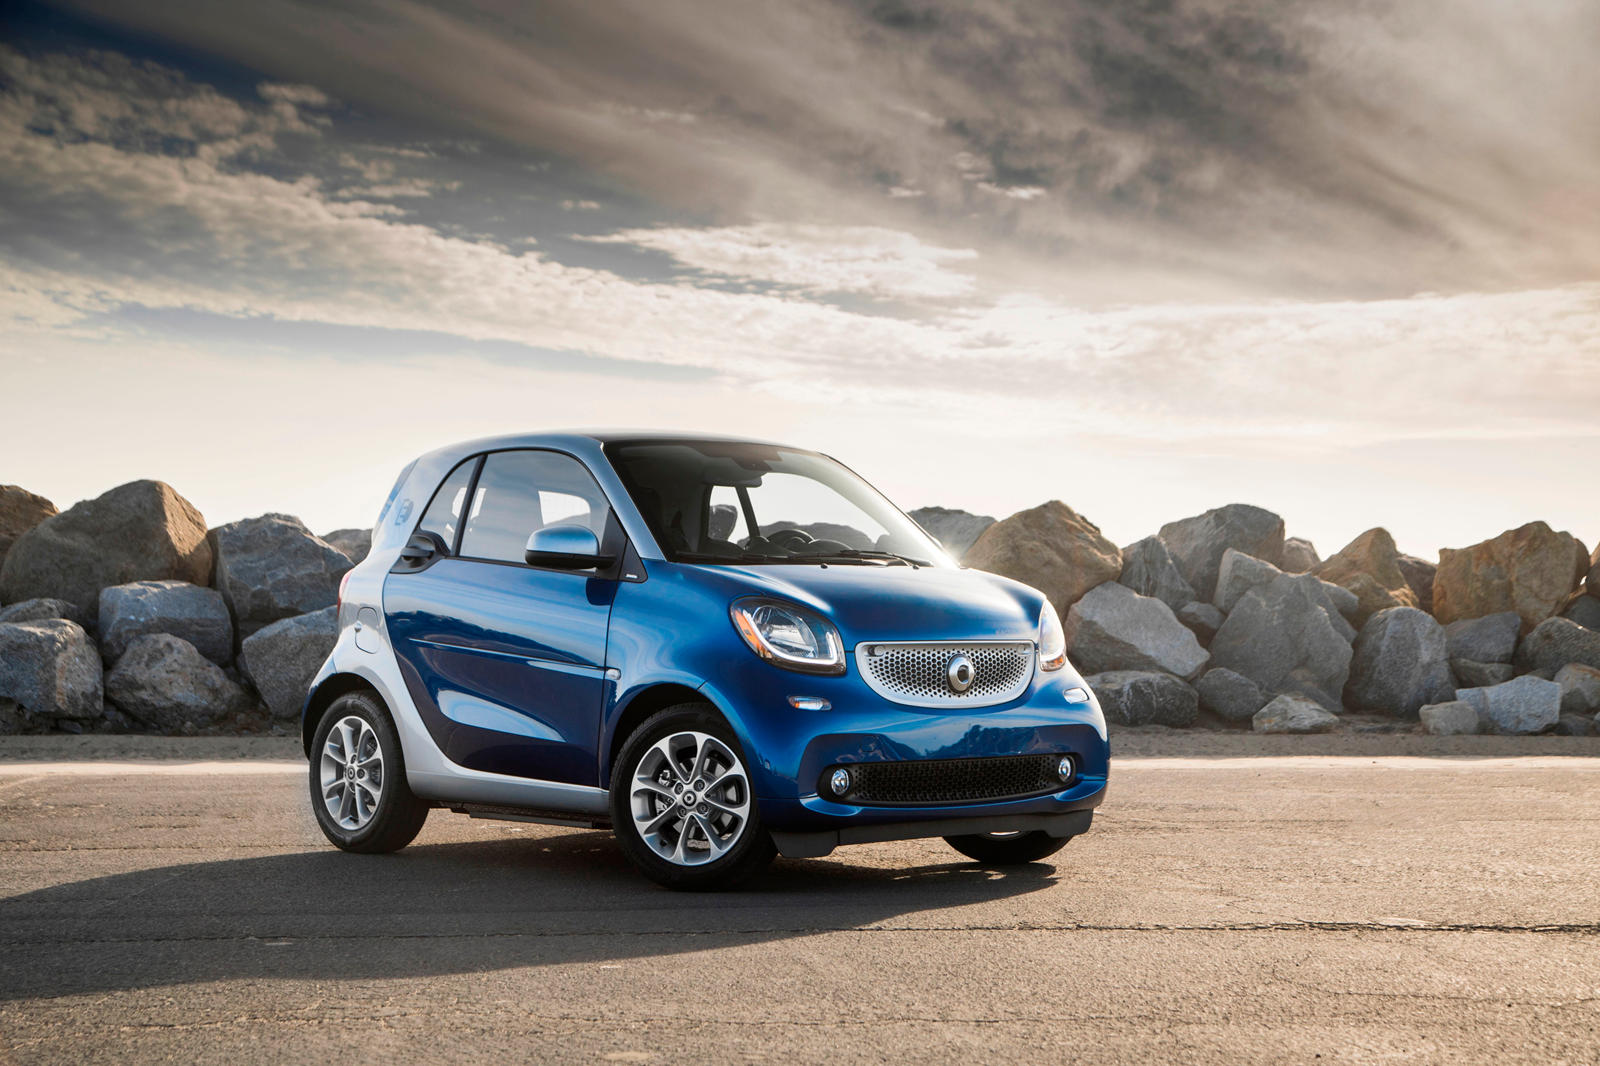 2017 smart fortwo Electric Drive Exterior Photos